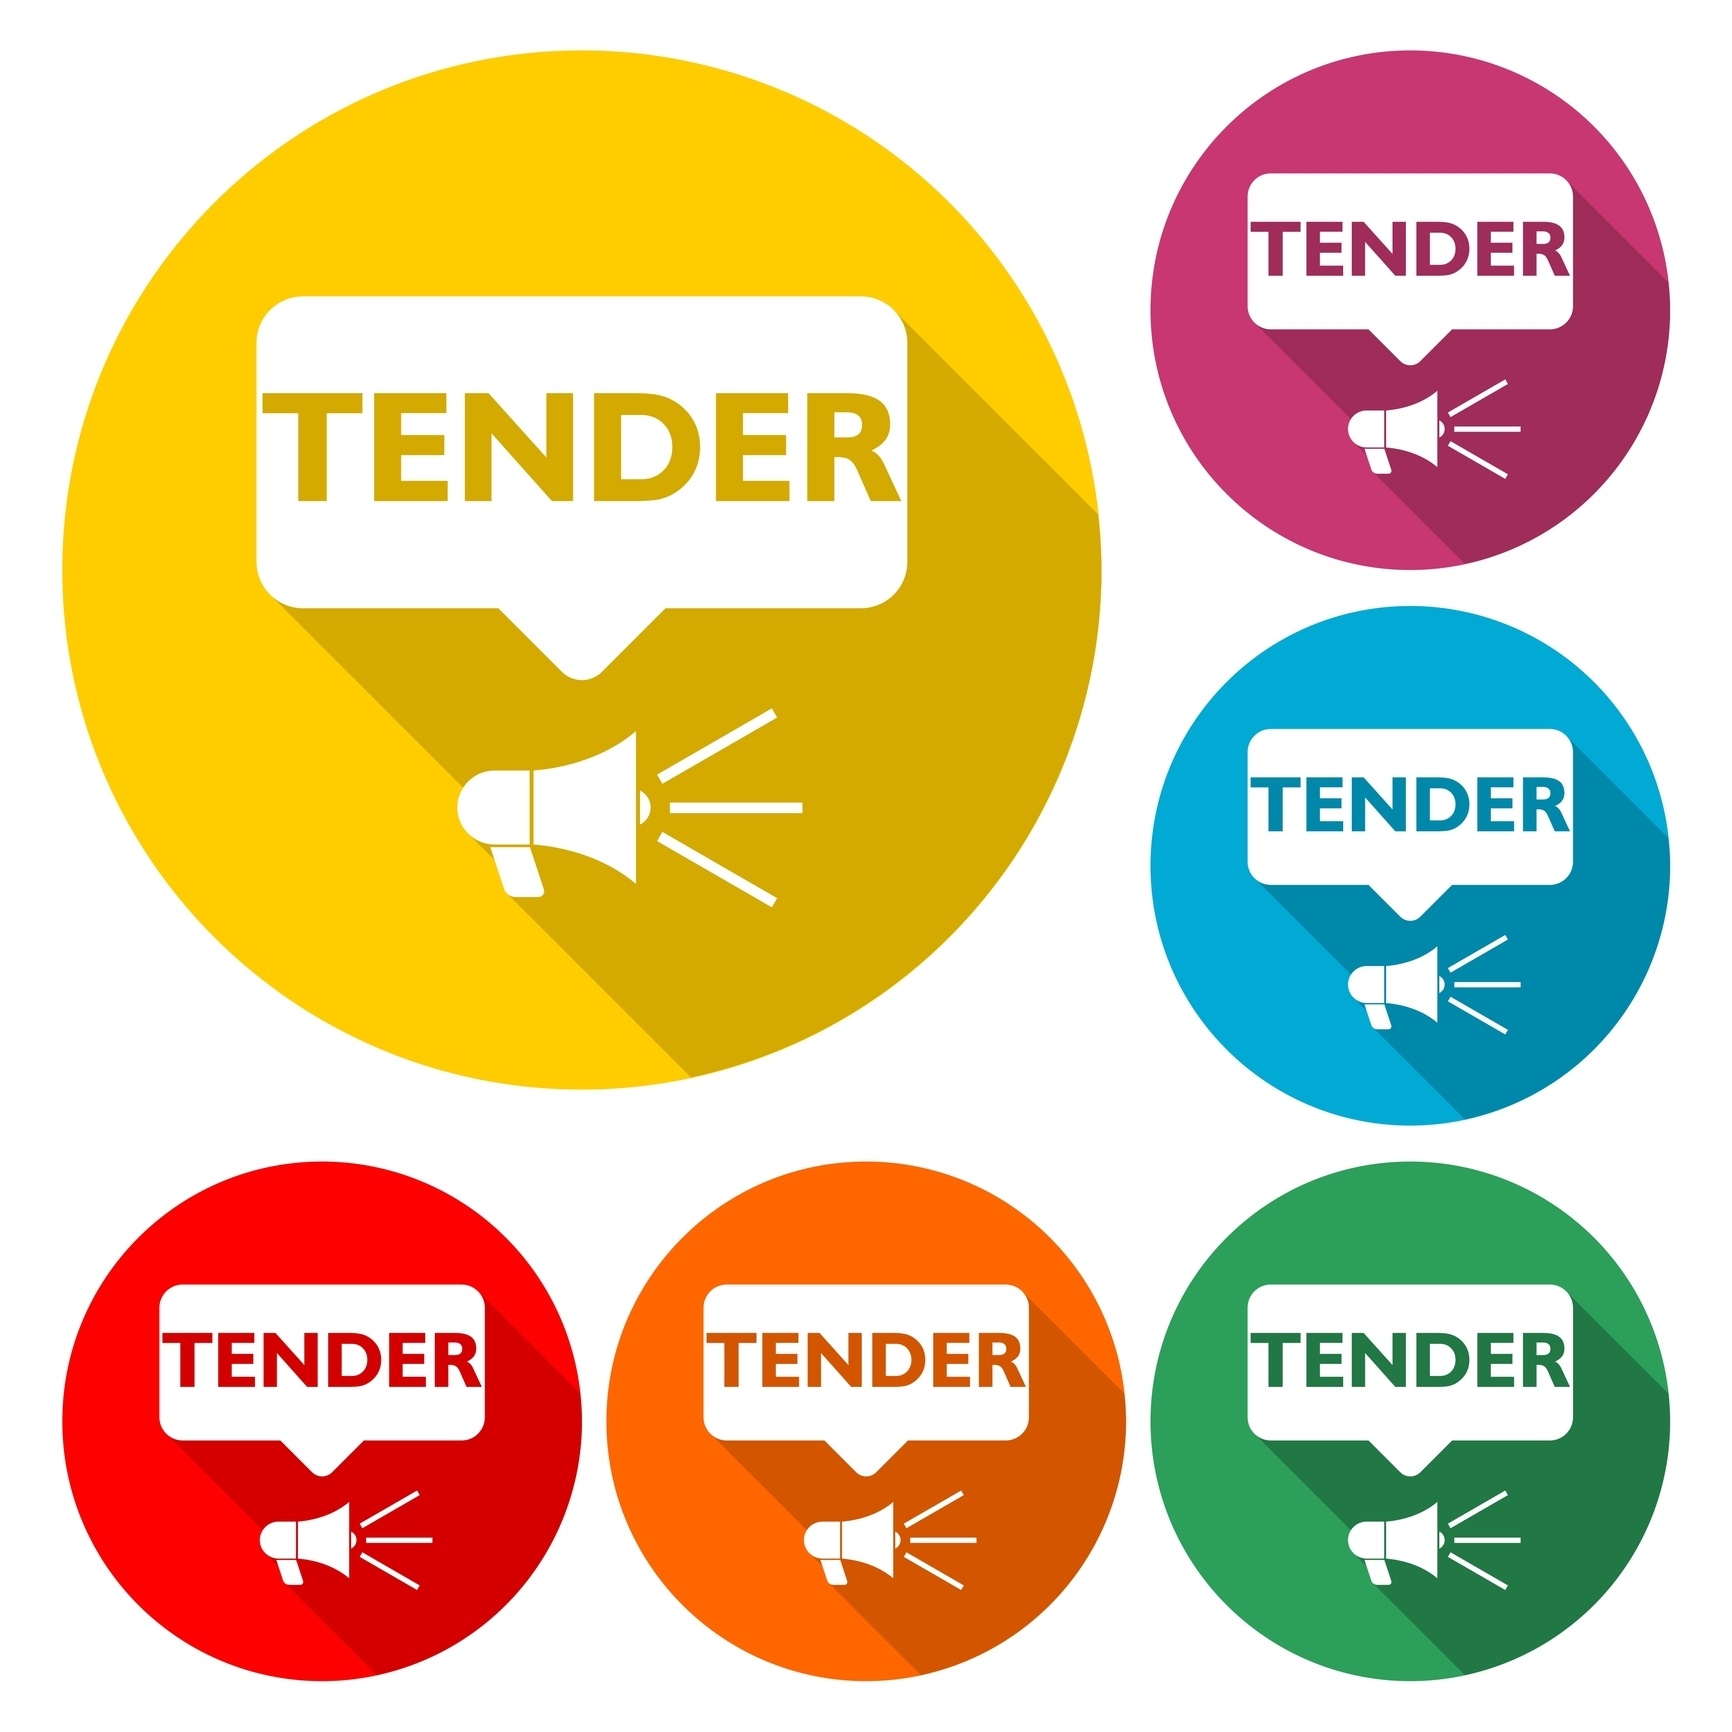 Tender training course